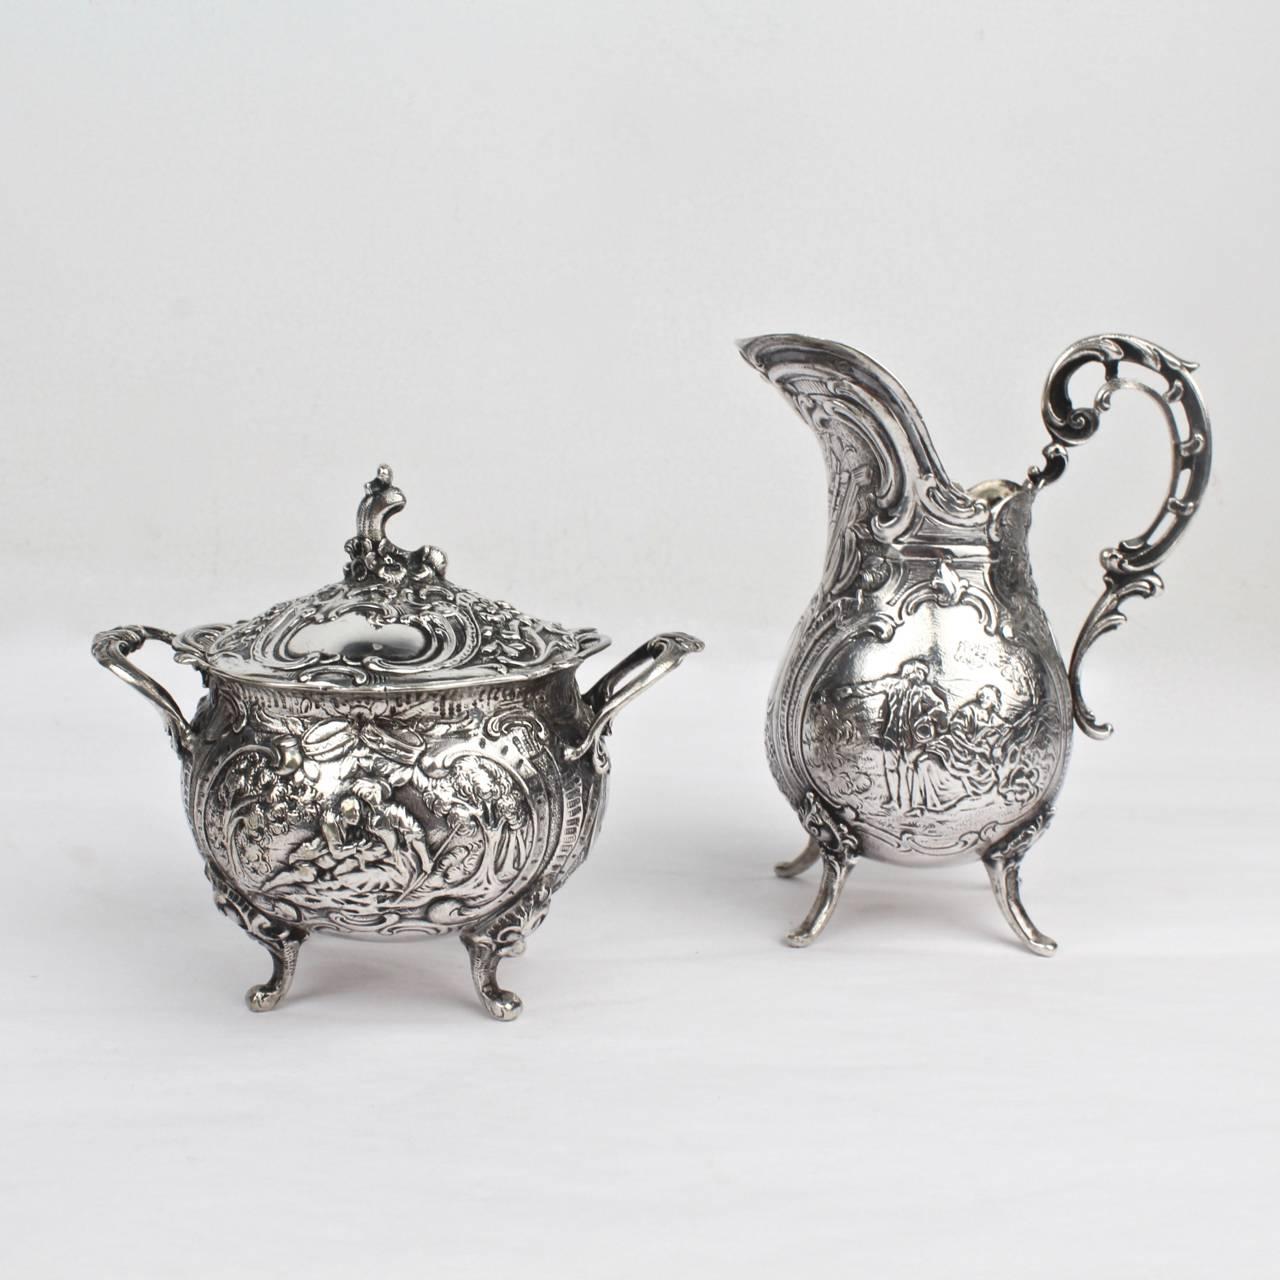 A highly ornate German solid silver creamer and sugar set by J. Riemann with repoussé decoration throughout.

Perfect for a small tea or coffee service (and of course the cabinet)!

The central cartouches on each piece depict pastoral scenes